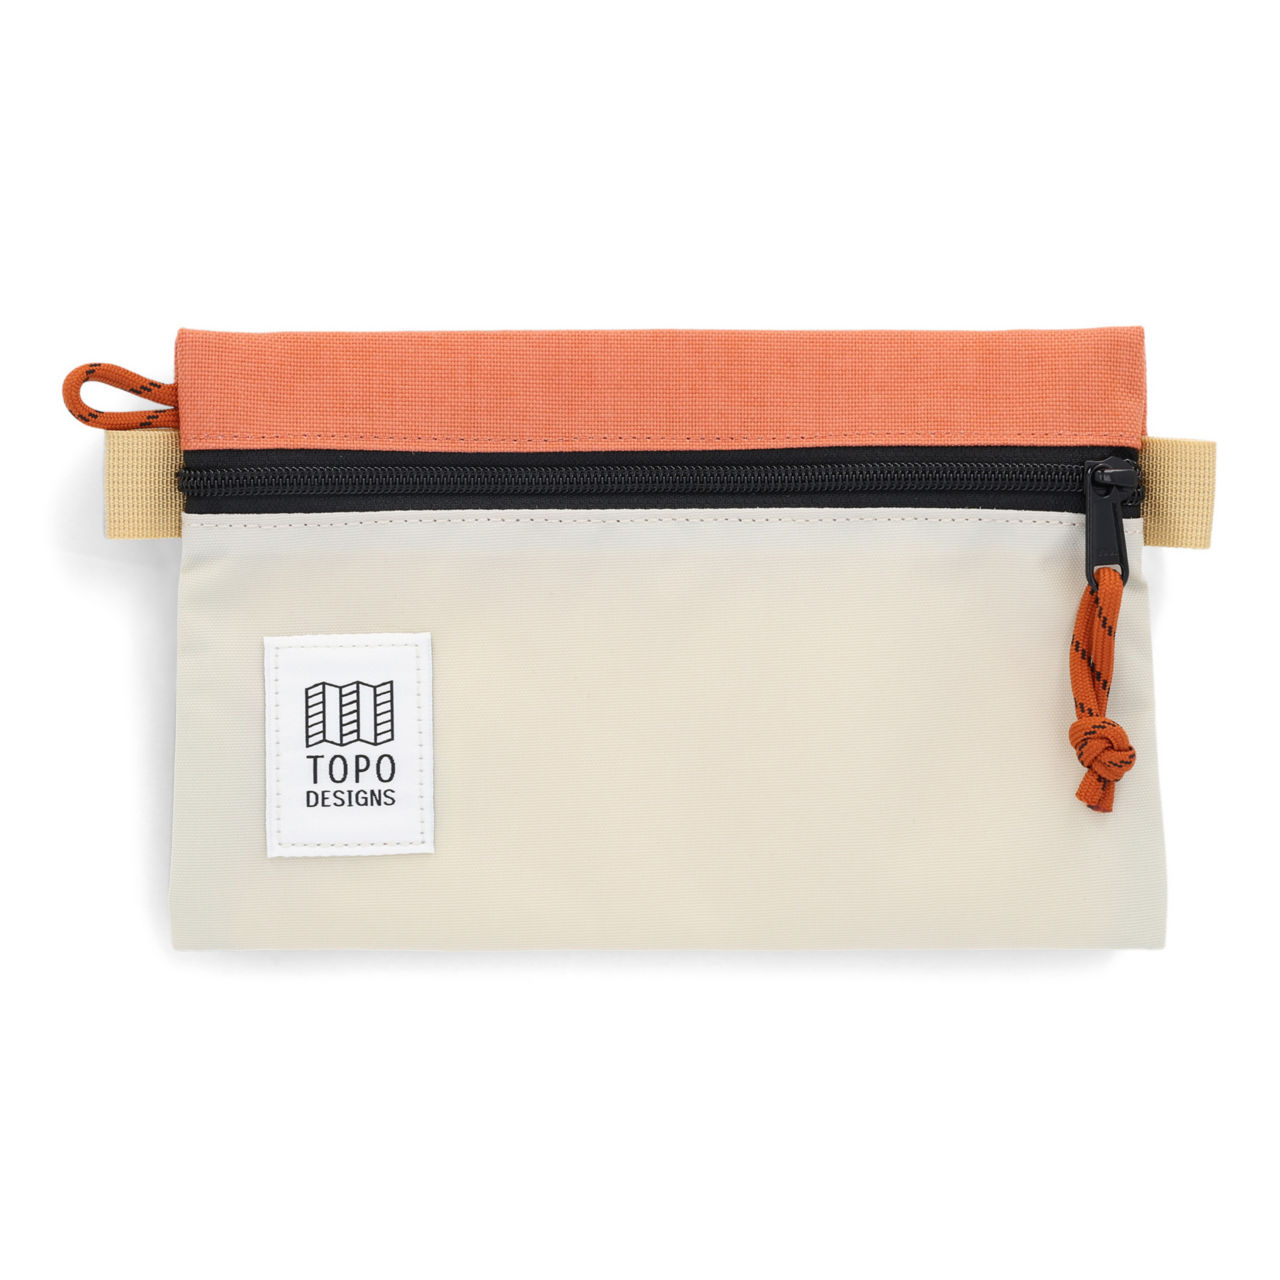 Topo Designs Small Accessory Bag -  image number 0